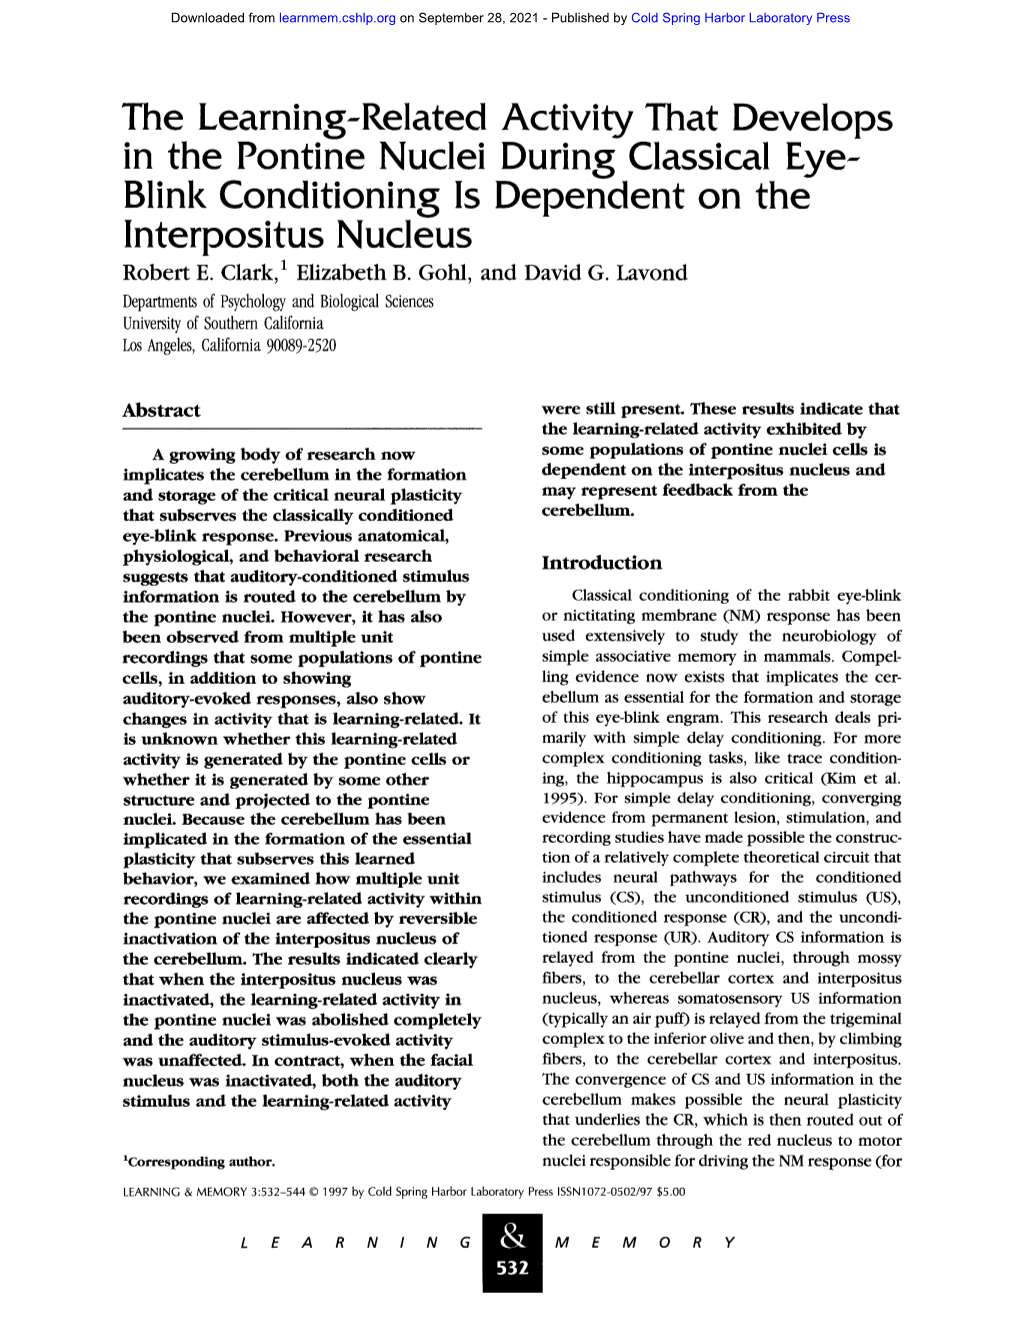 The Learning-Related Activity That Develops in the Pontine Nuclei During Classical Eye- Blink Conditioning Is Dependent on the Interpositus Nucleus Robert E